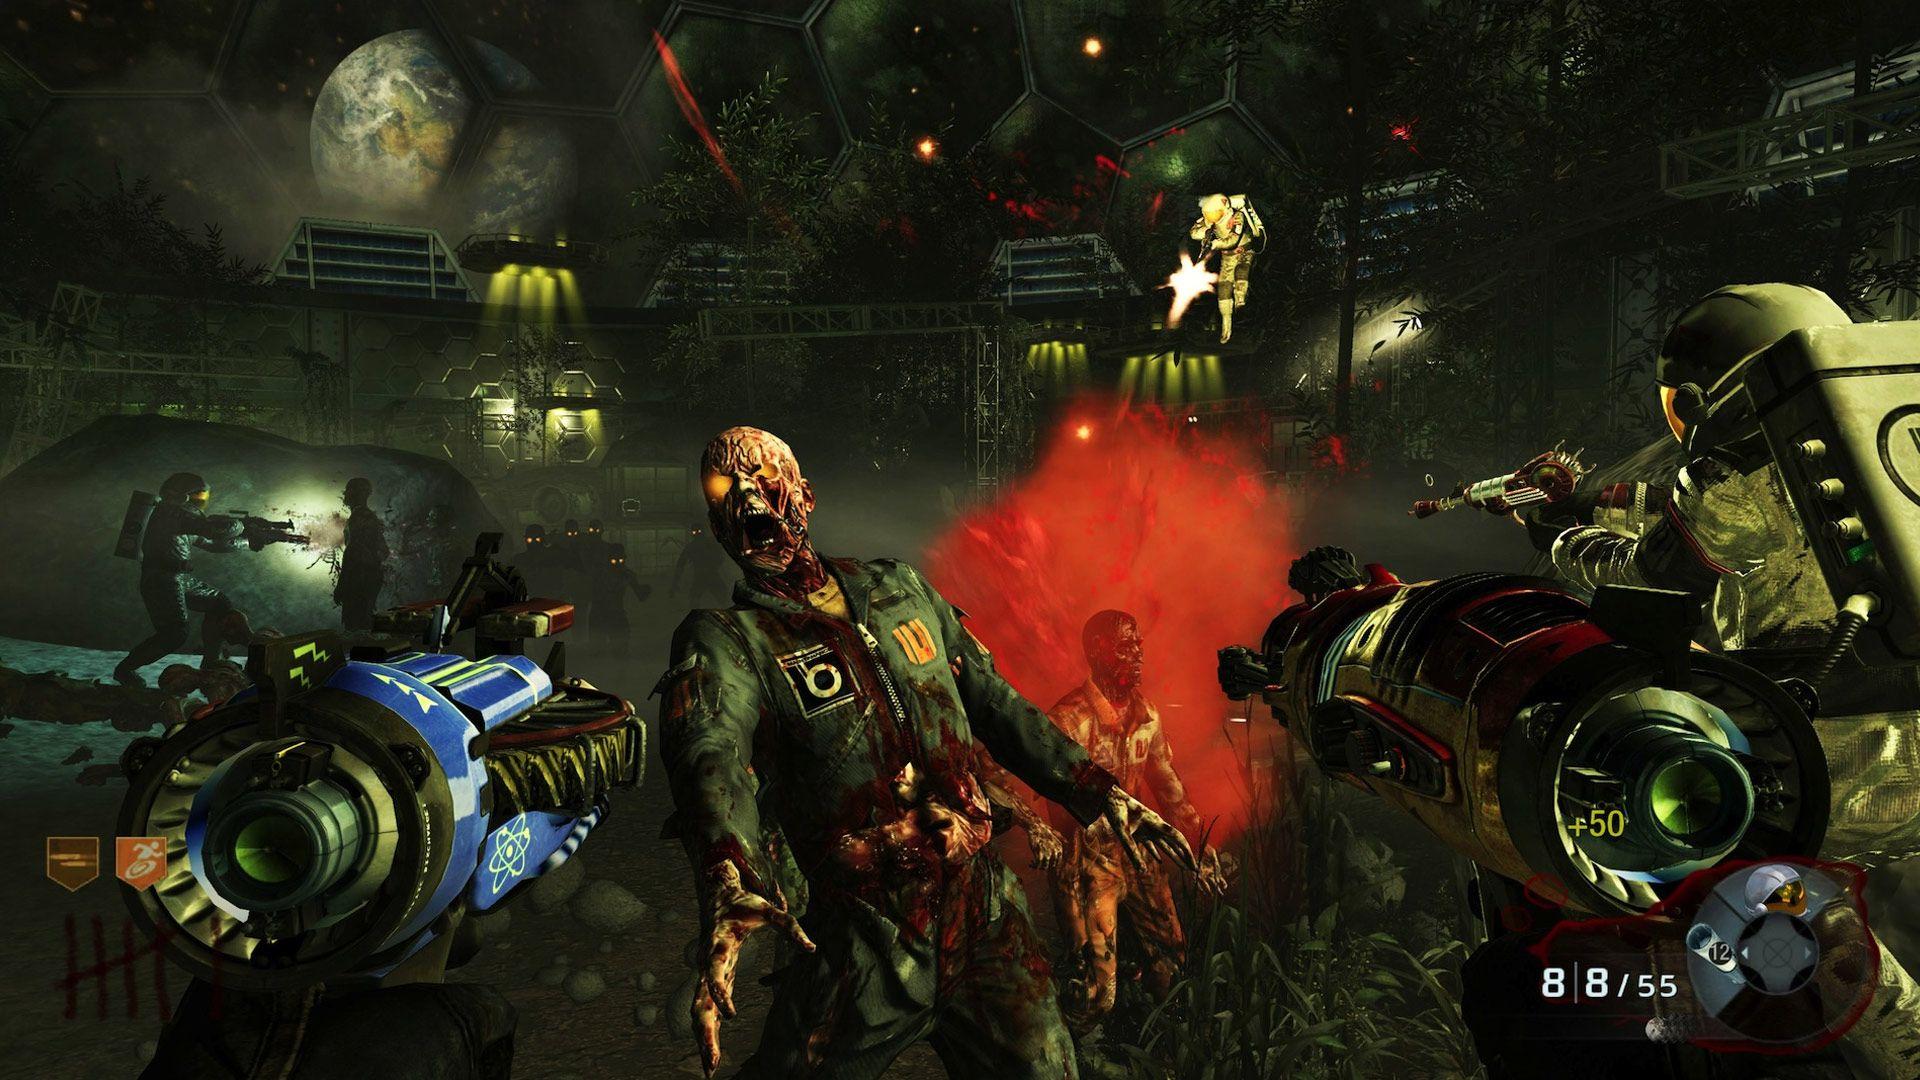 Call Of Duty Zombies Gameplay Wallpaper 52276 1920x1080 px